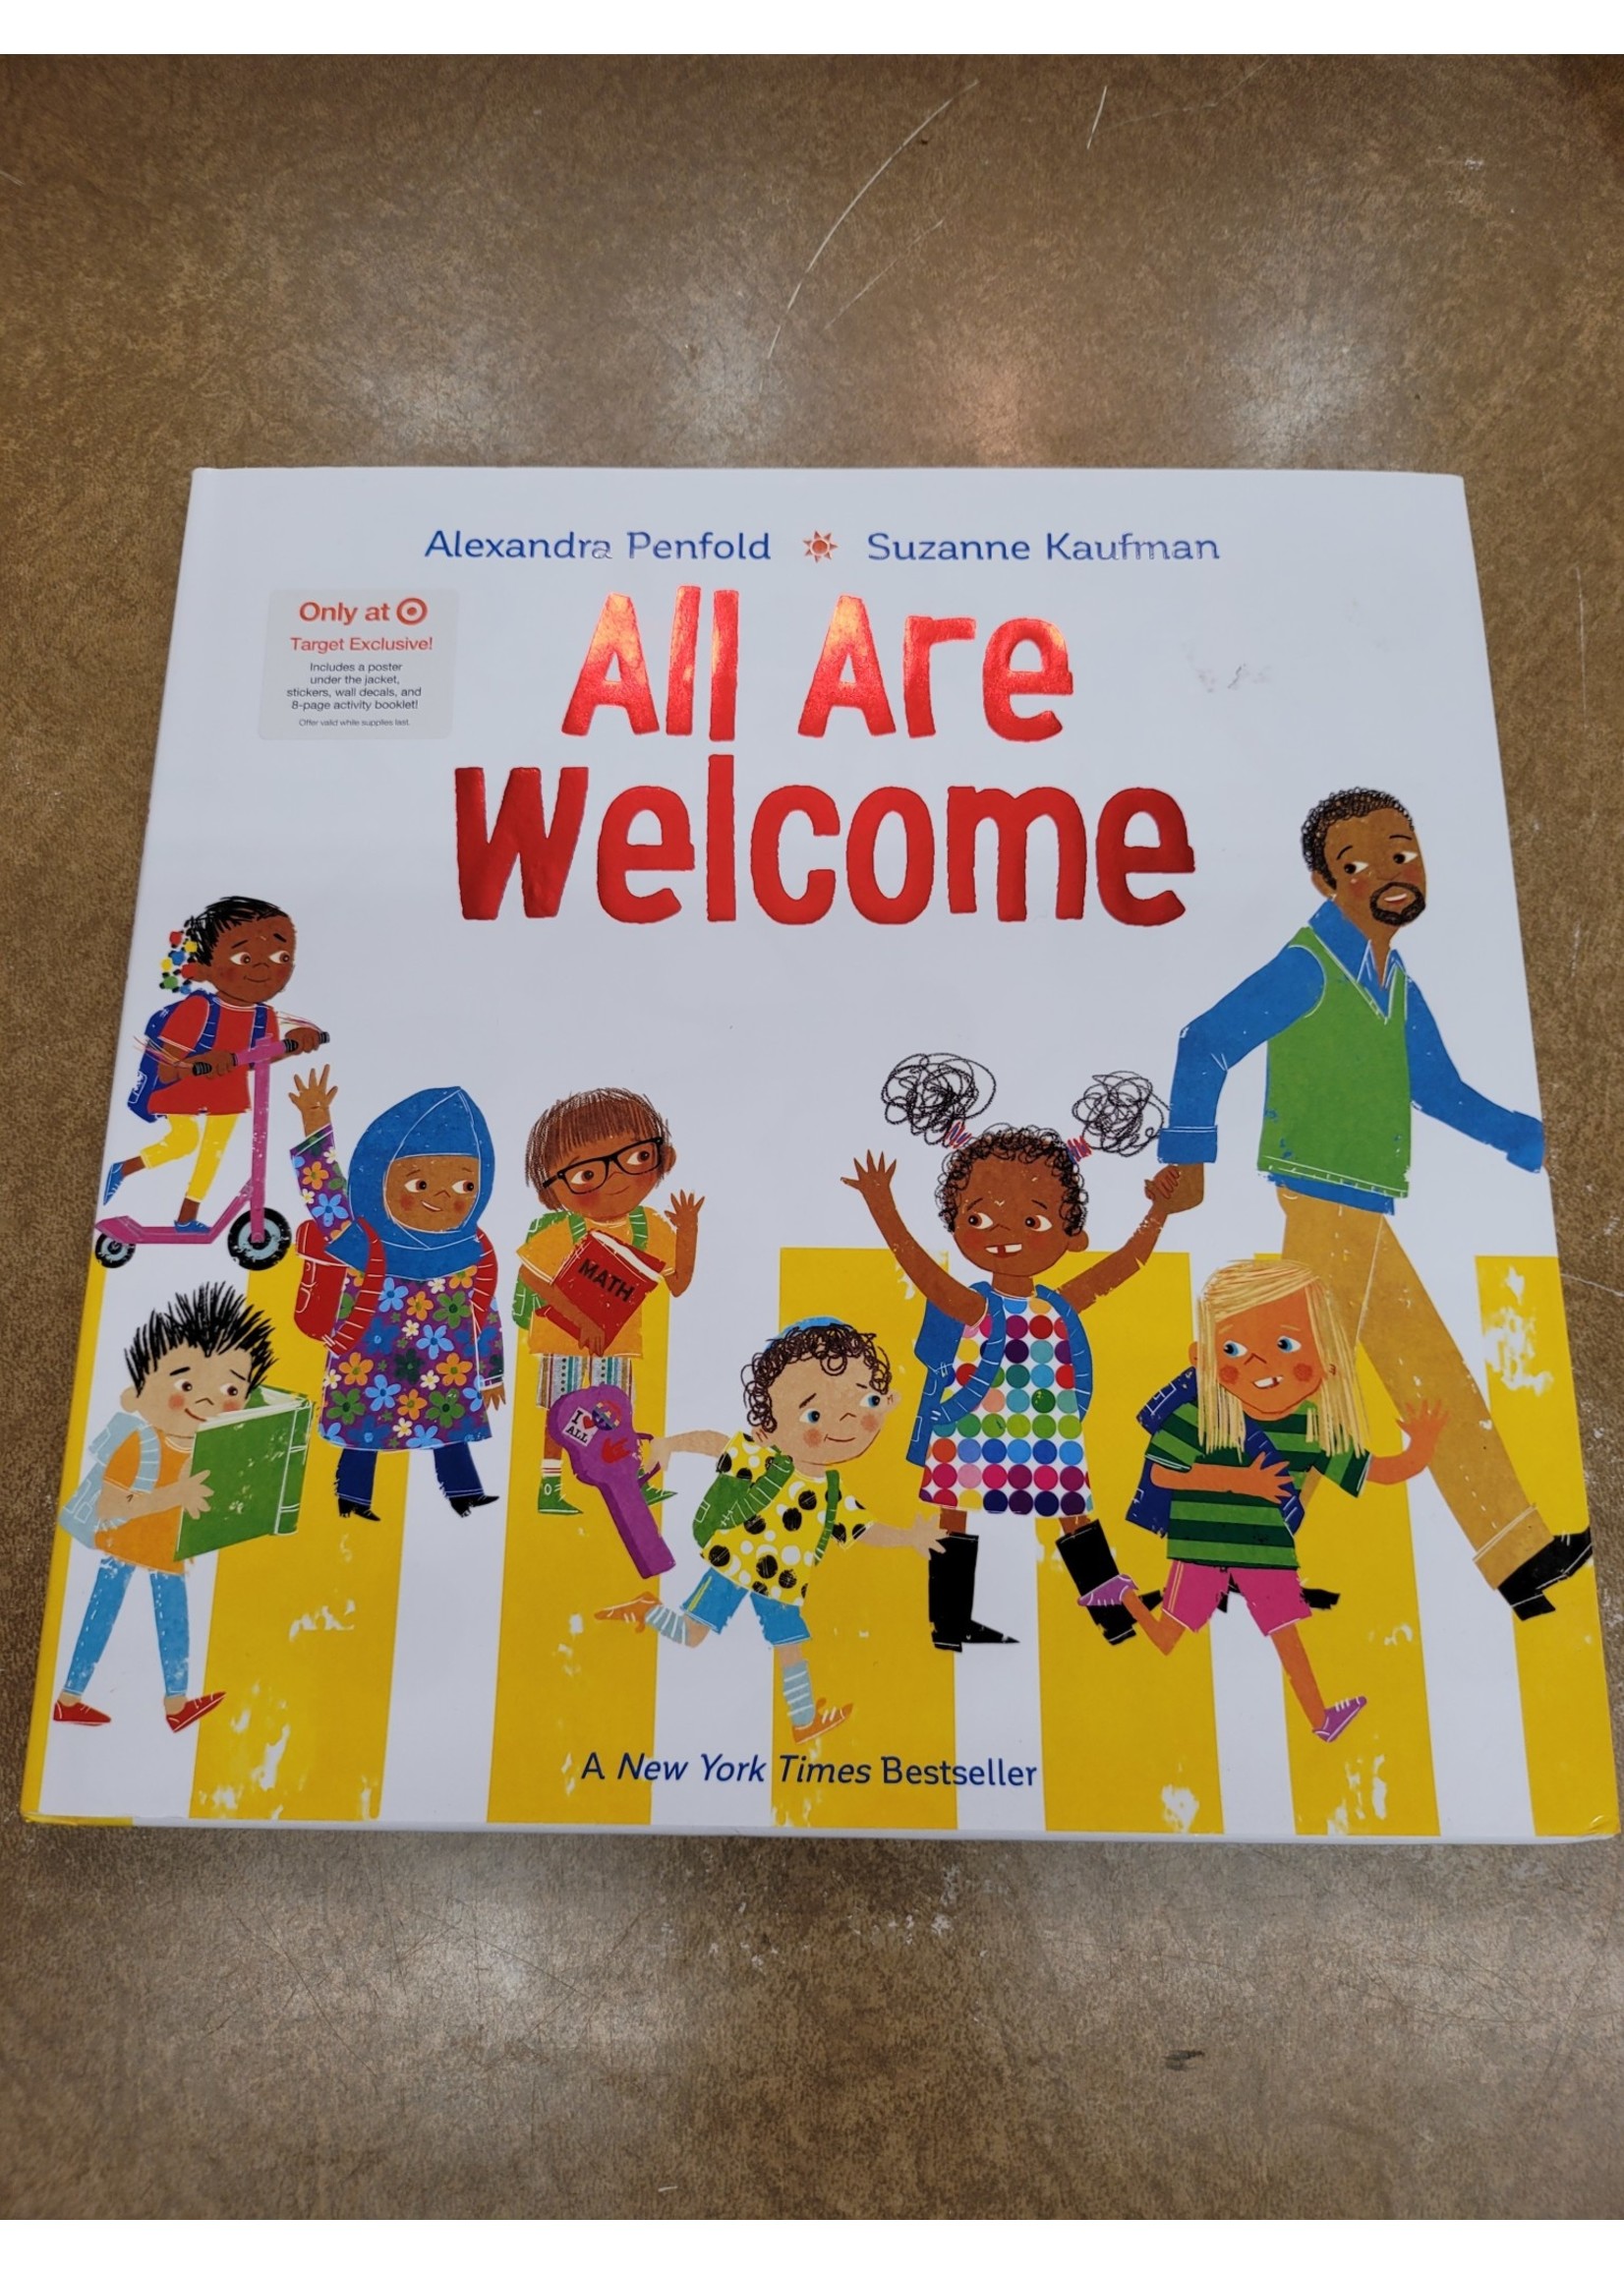 All Are Welcome - Target Exclusive Edition Proposed by Alexandra Penfold